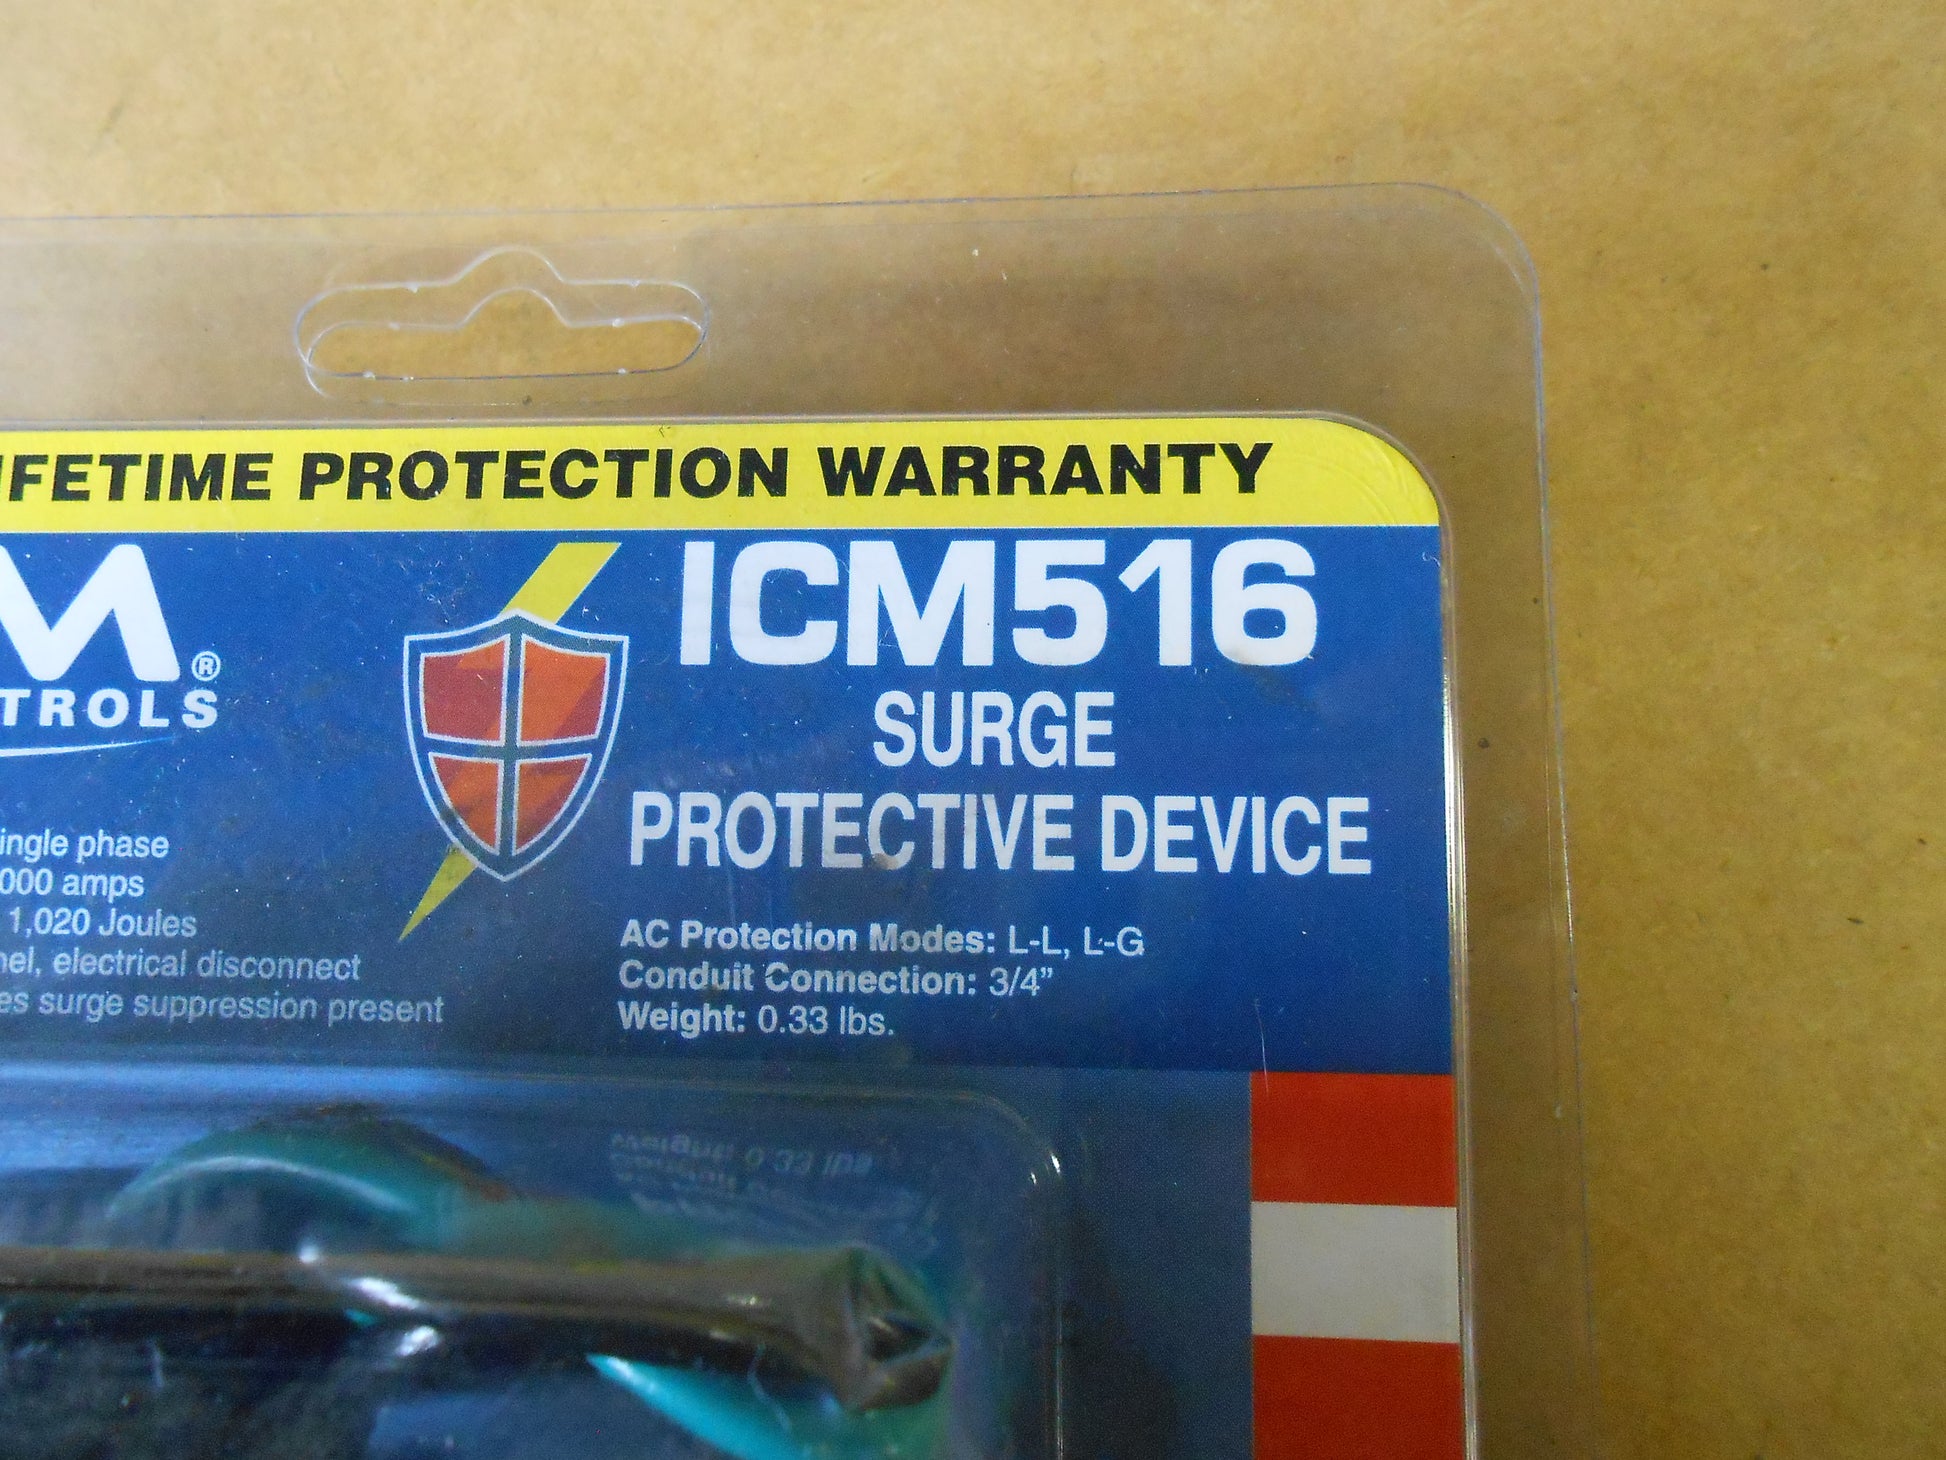 SURGE PROTECTIVE DEVICE